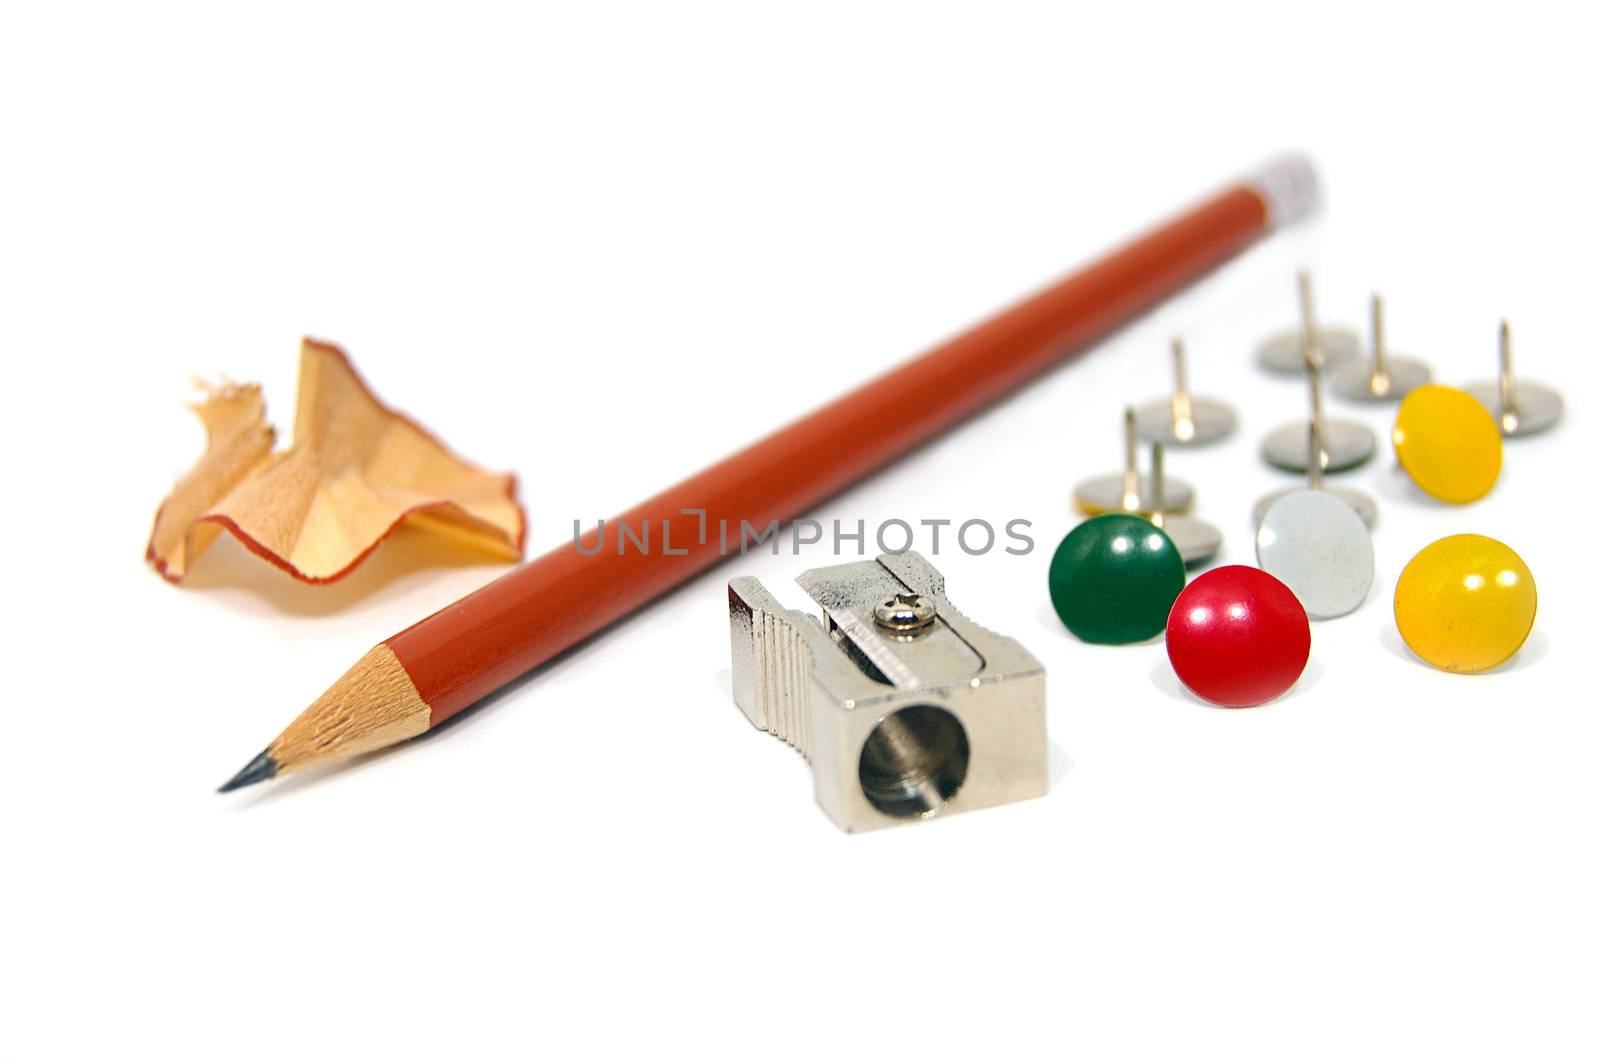 Sharpener, cuttings, pen and pins isolated on white